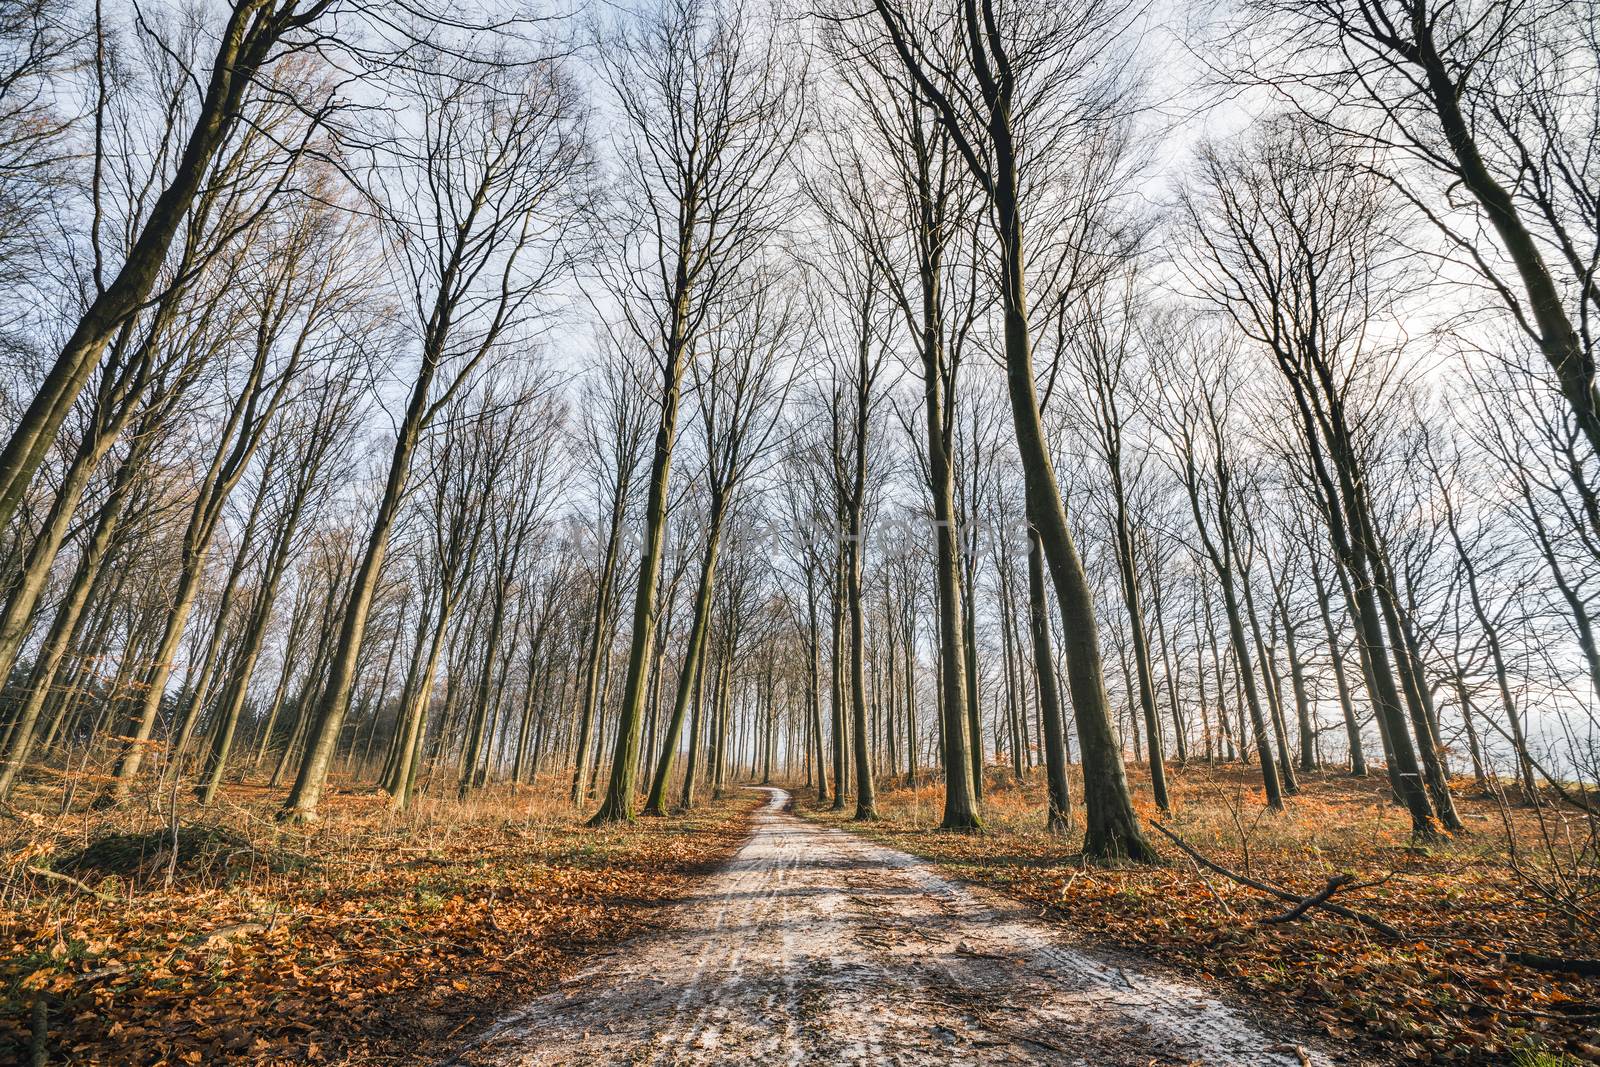 Curvy road in a forest with tall trees by Sportactive